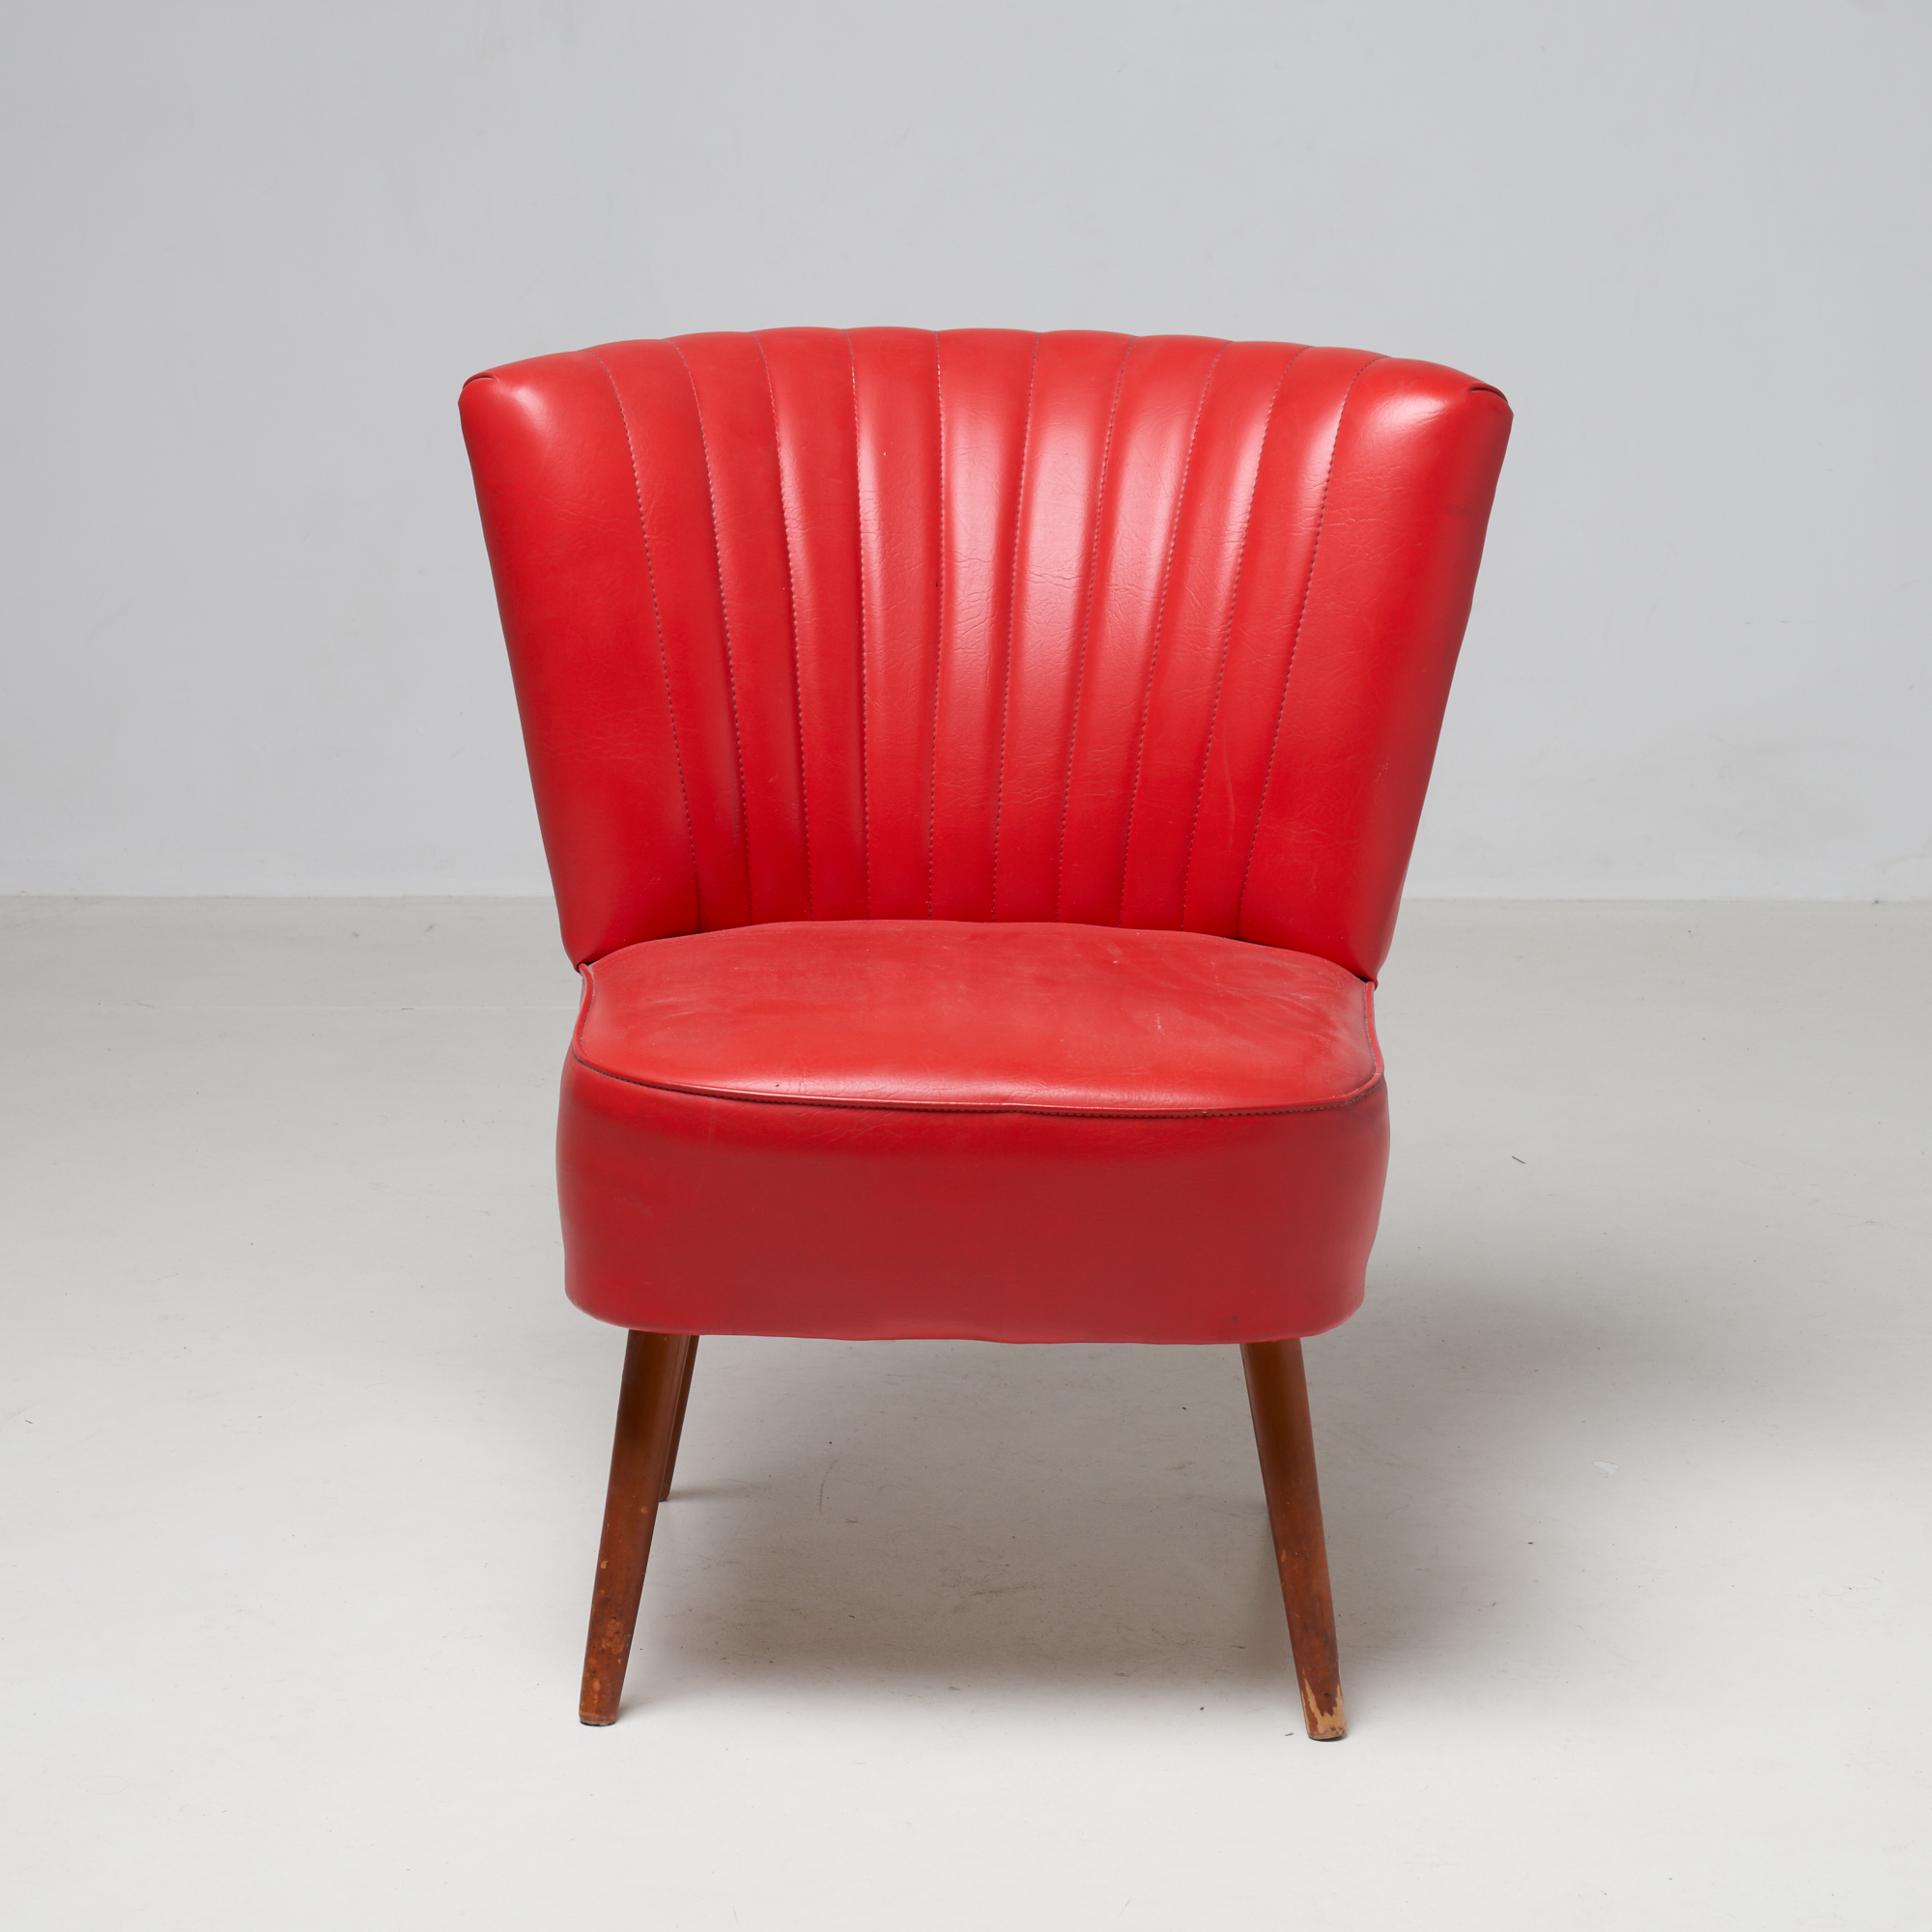 CHARMING VINTAGE RED COCKTAIL CHAIR, NETHERLANDS, 1970s